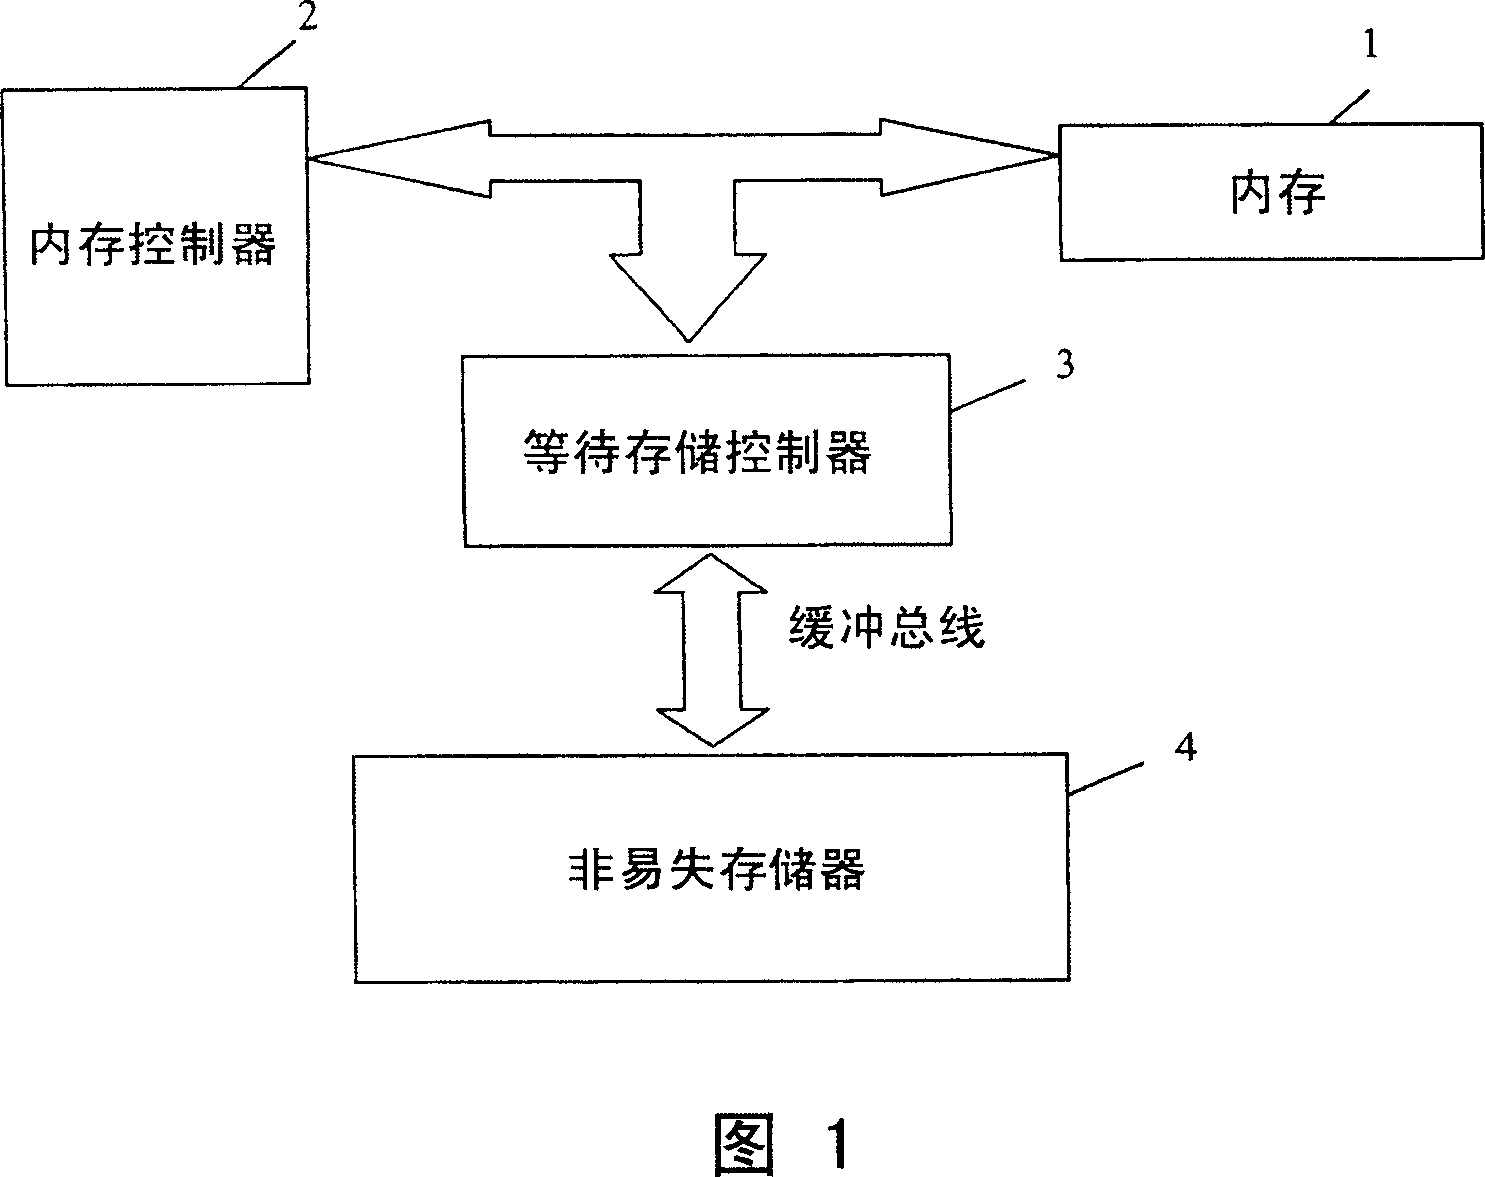 Memory backup device and method